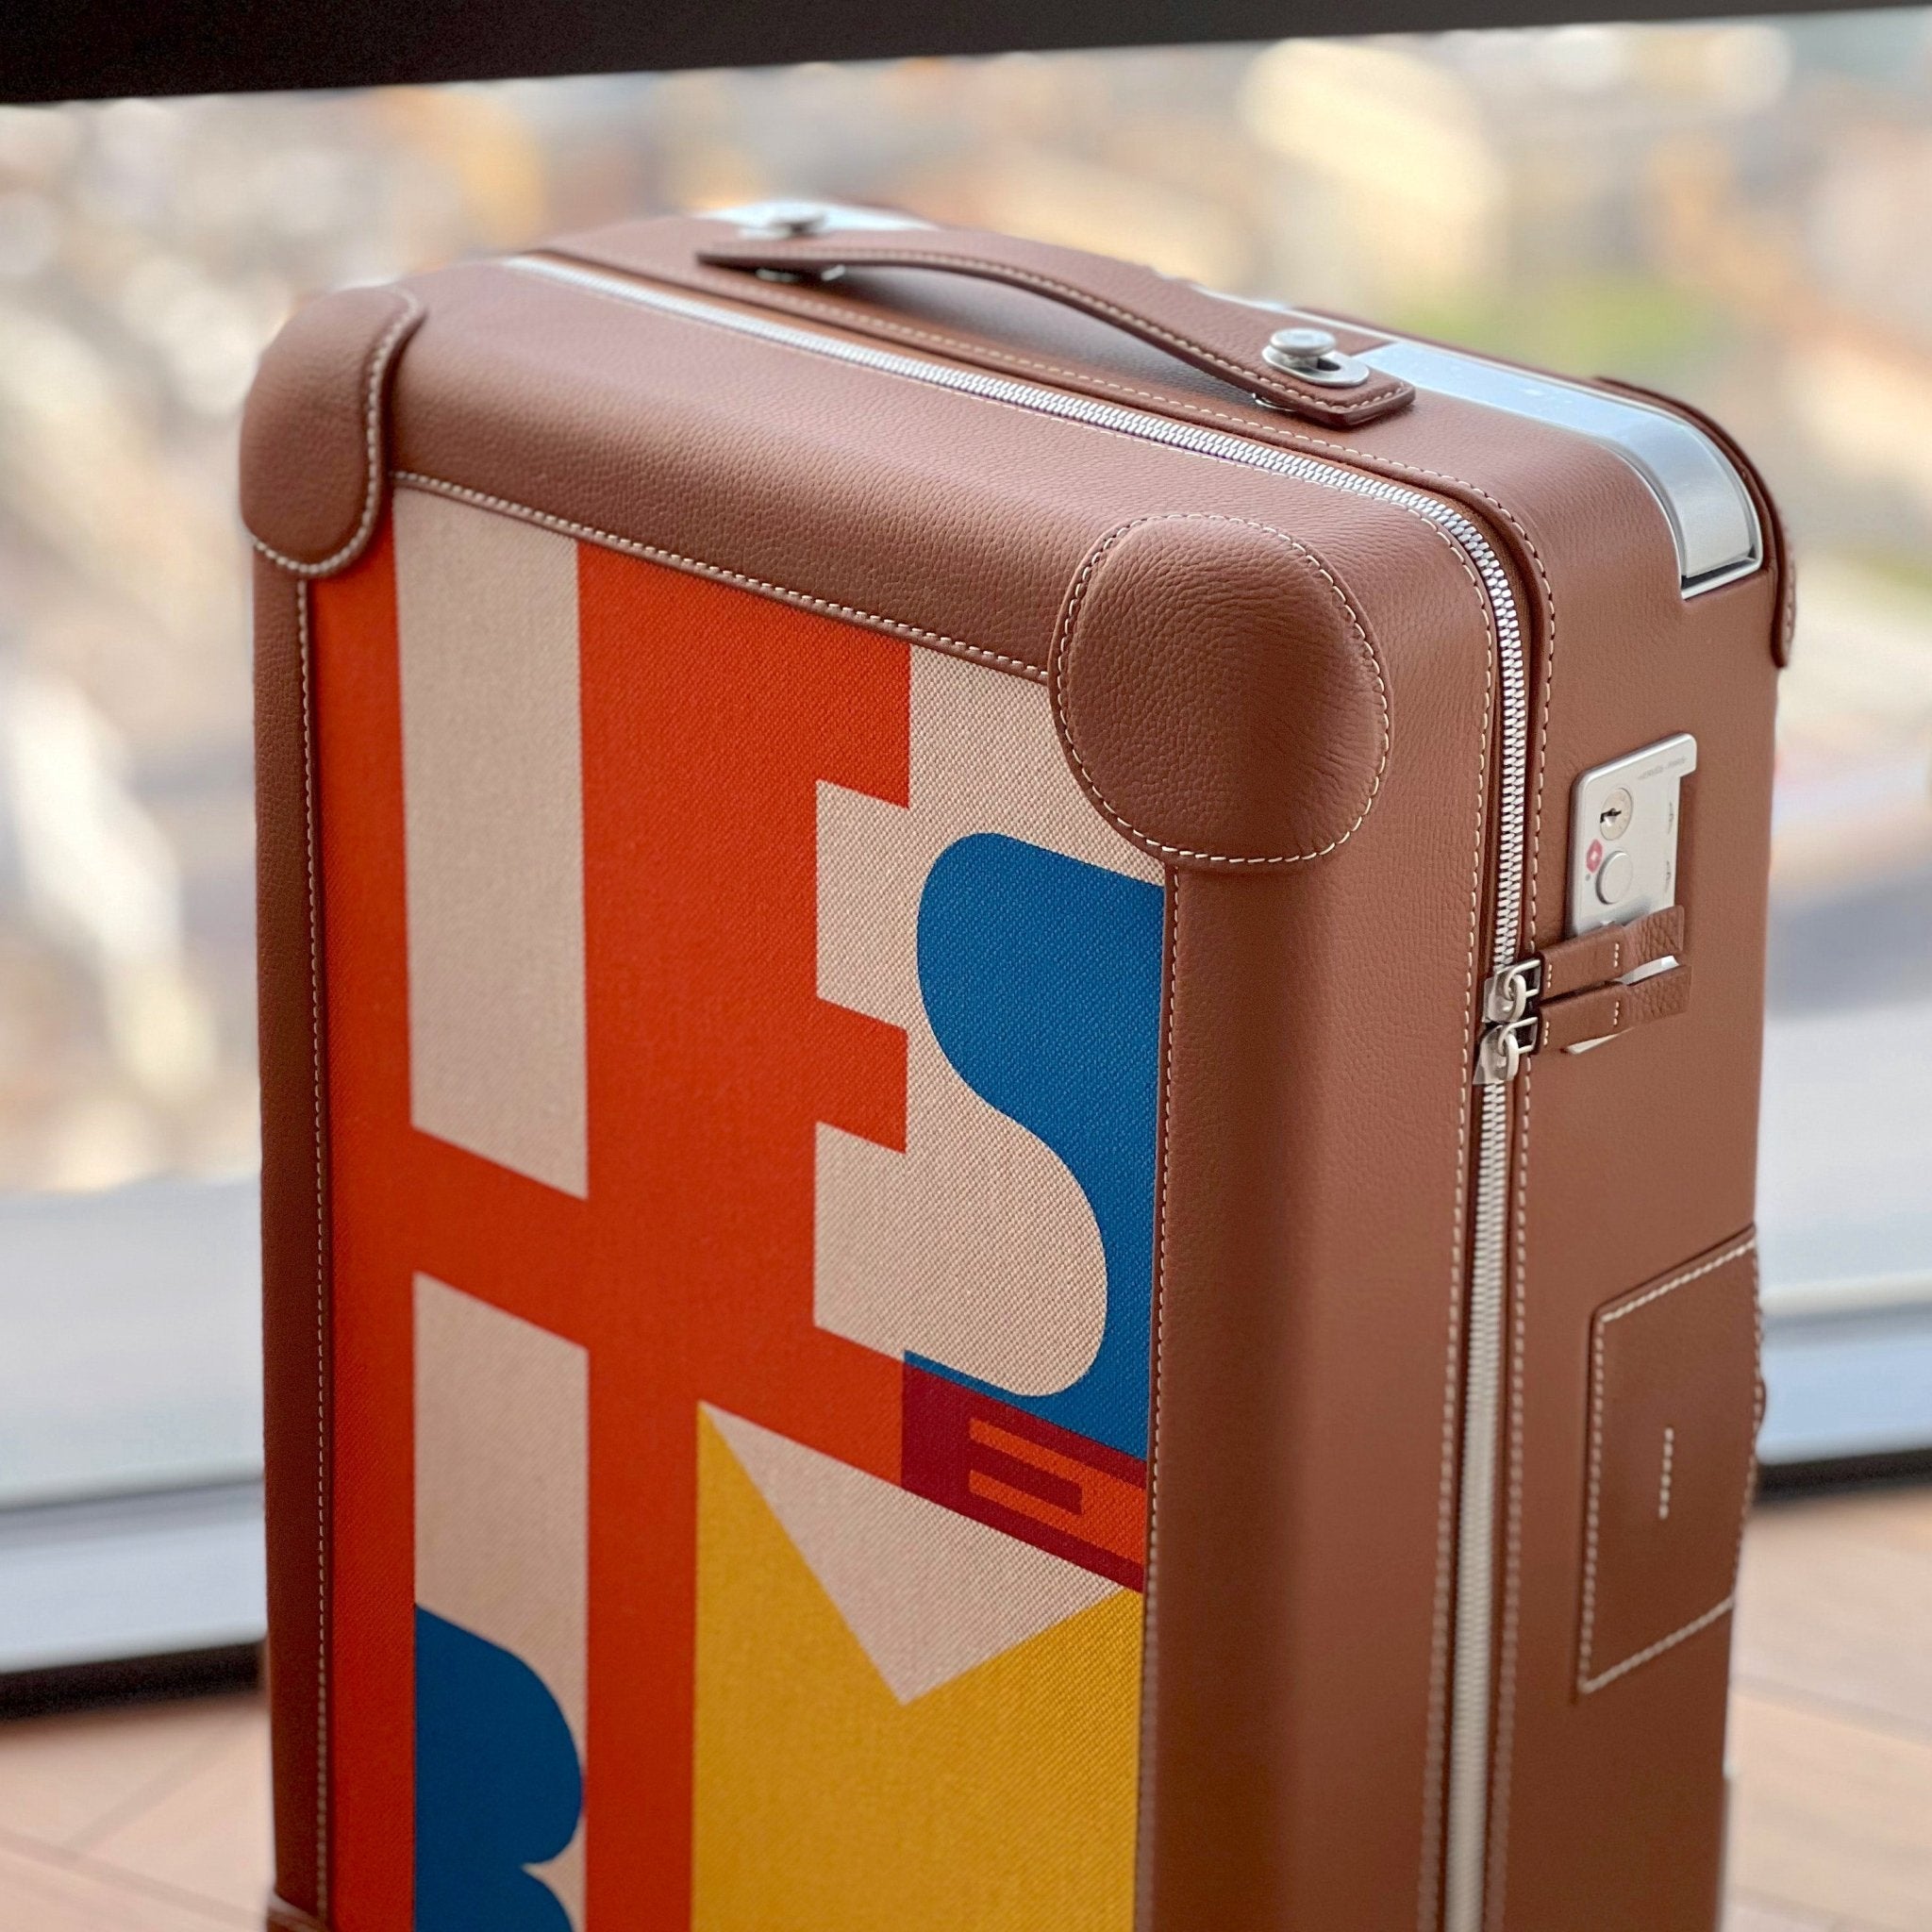 hermes rms suitcase